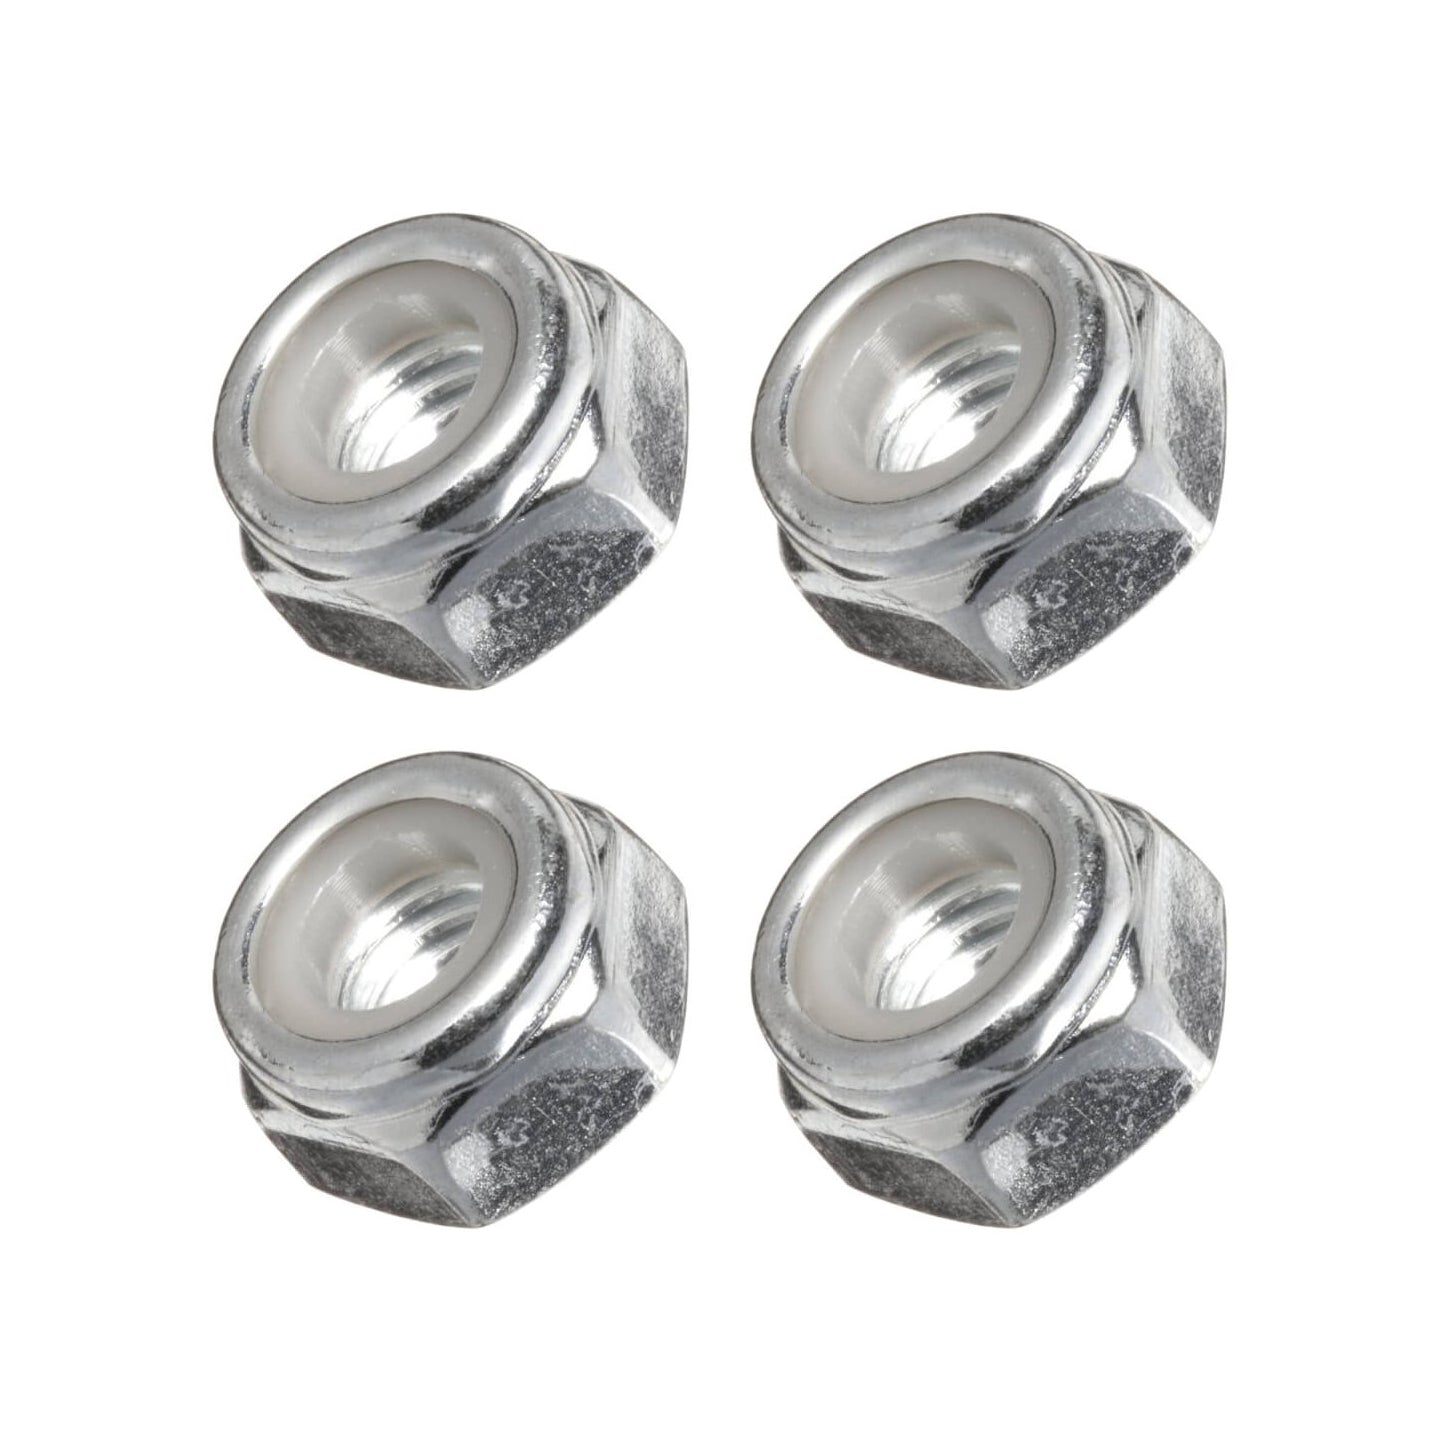 Truck Axle Nuts (Set of 4)